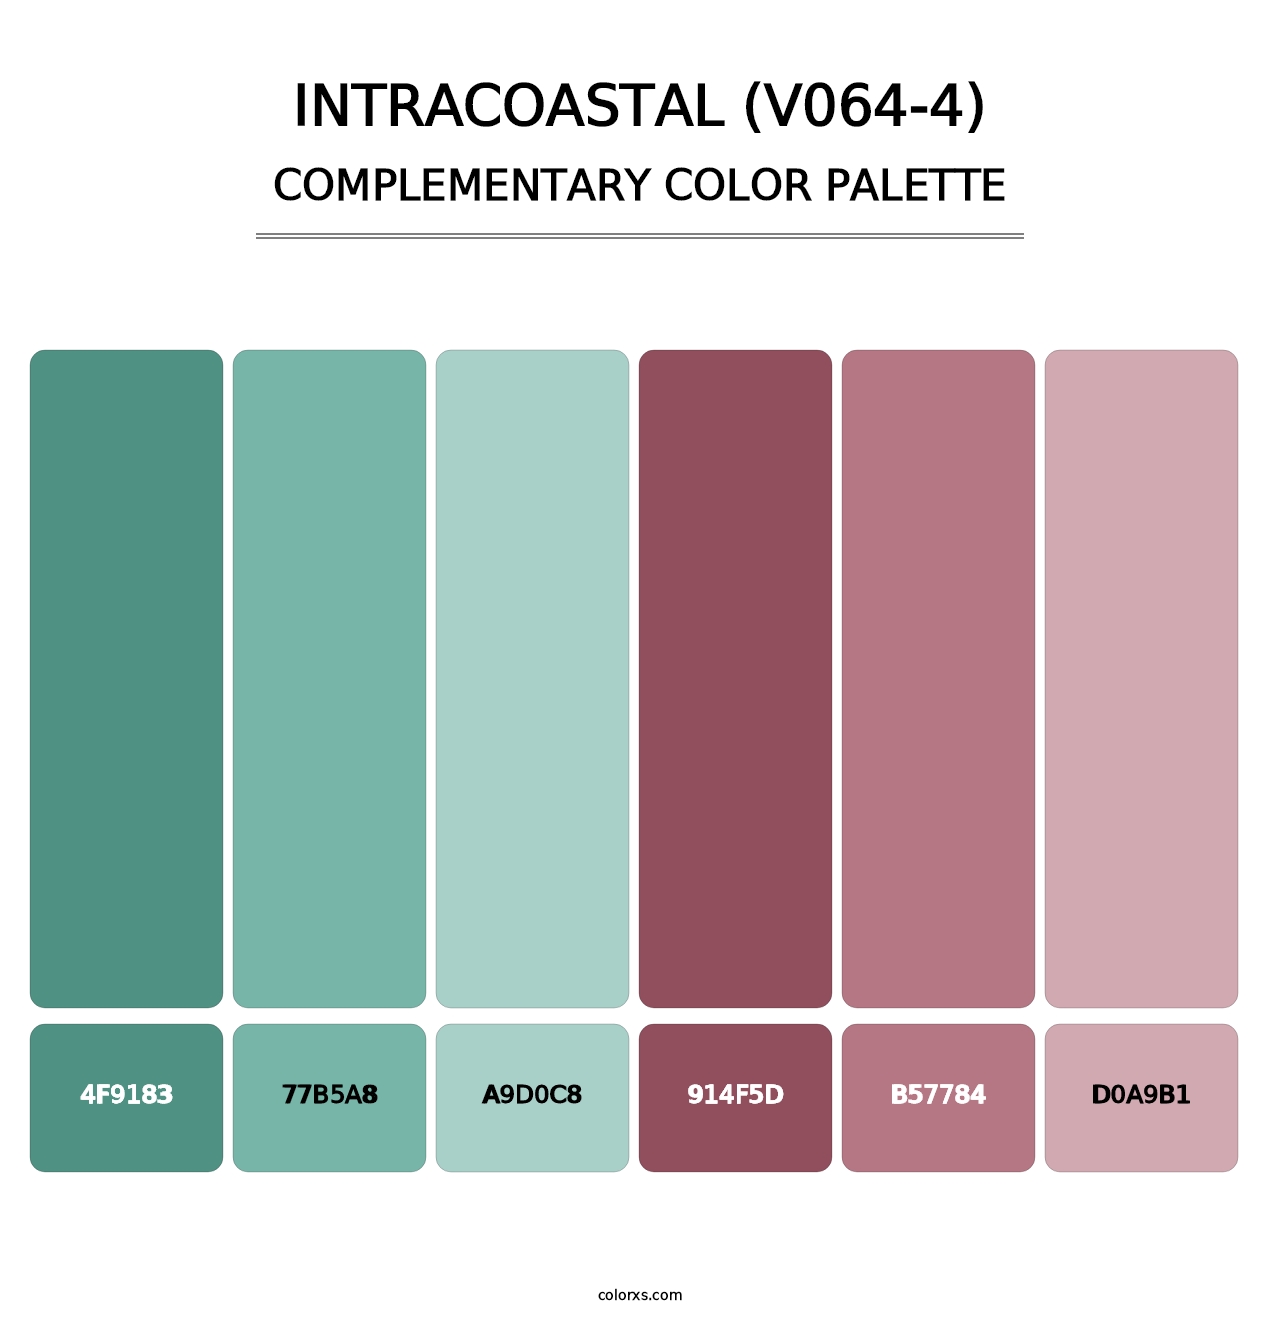 Intracoastal (V064-4) - Complementary Color Palette